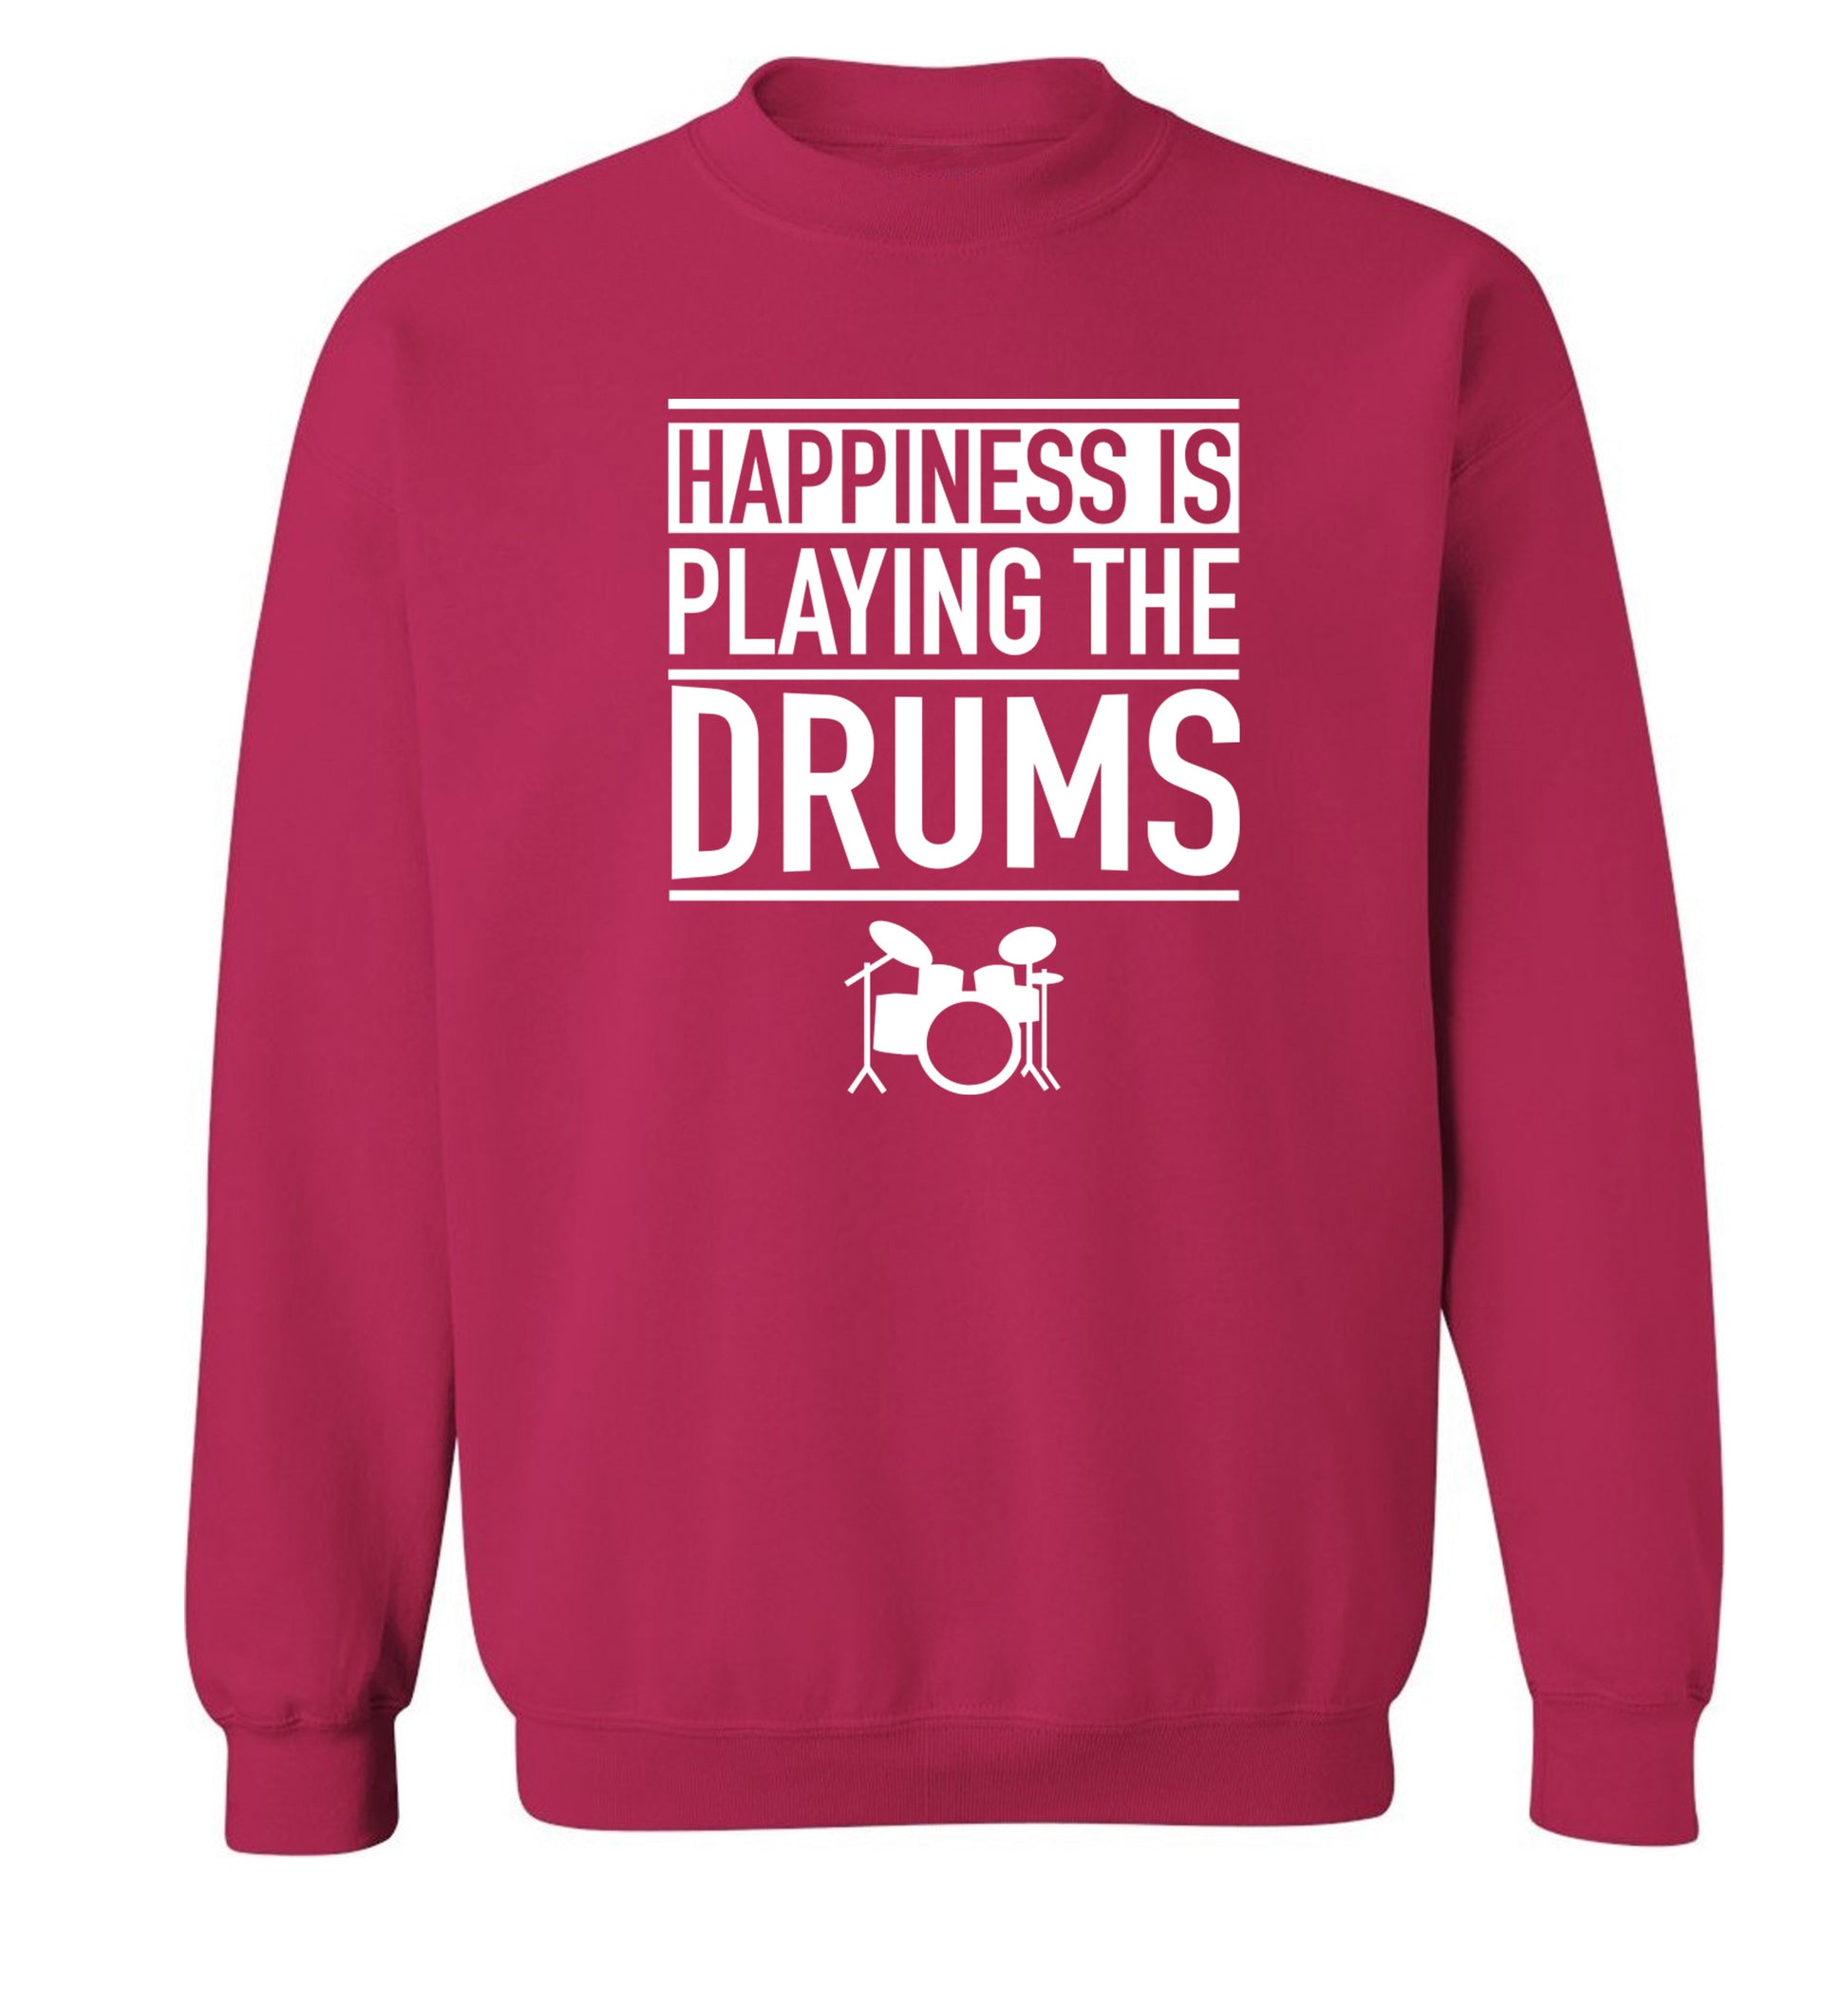 Happiness is playing the drums Adult's unisex pink Sweater 2XL